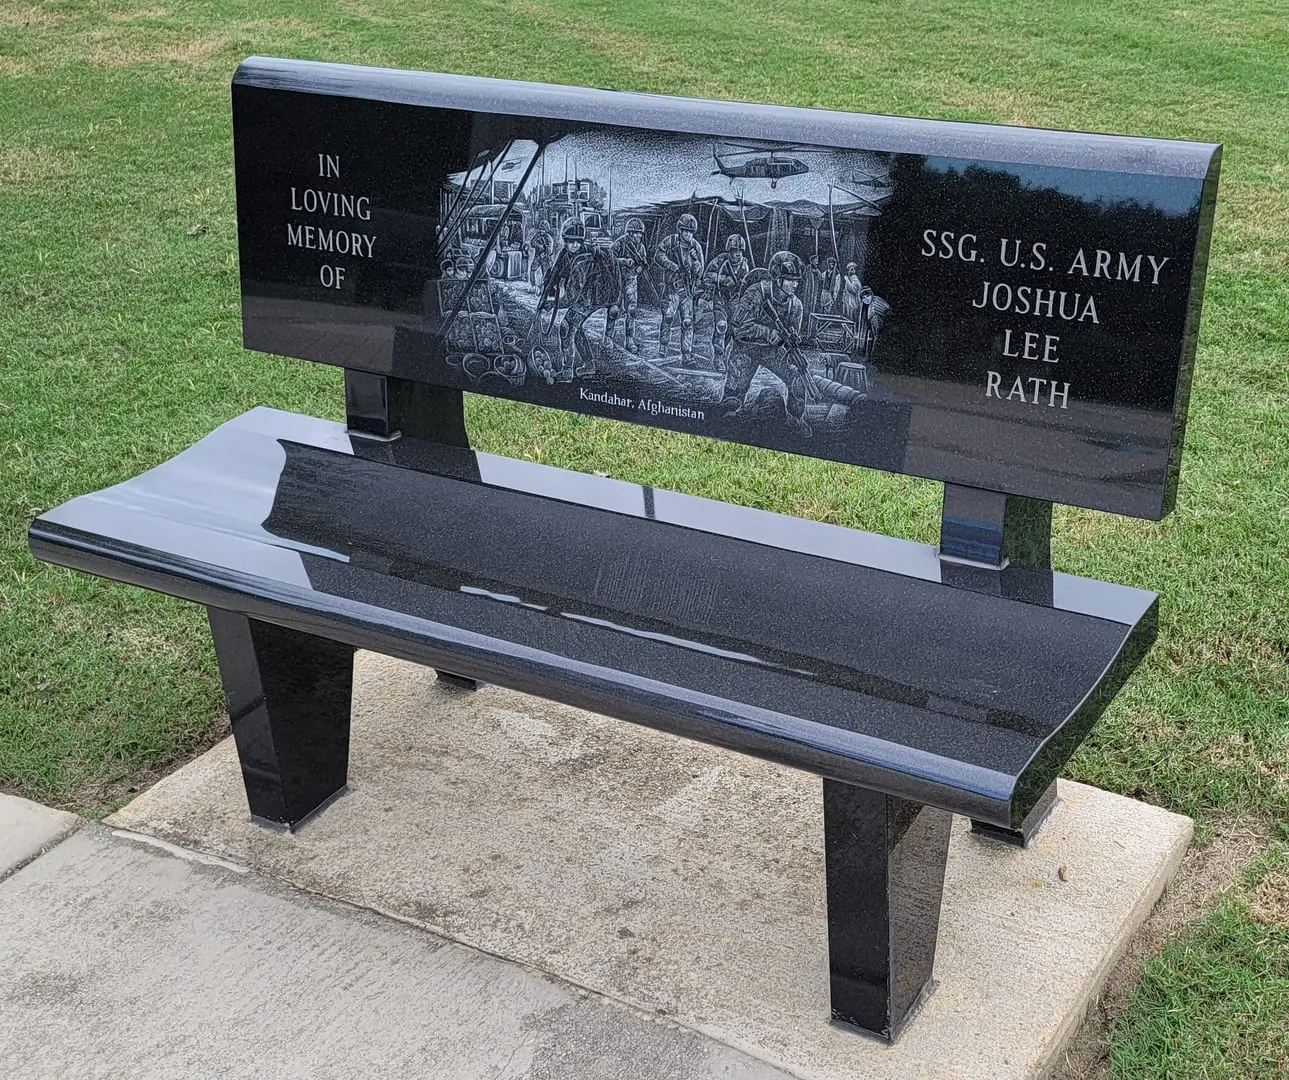 A picture of a beautiful bench in loving memory of Joshua Lee Rath